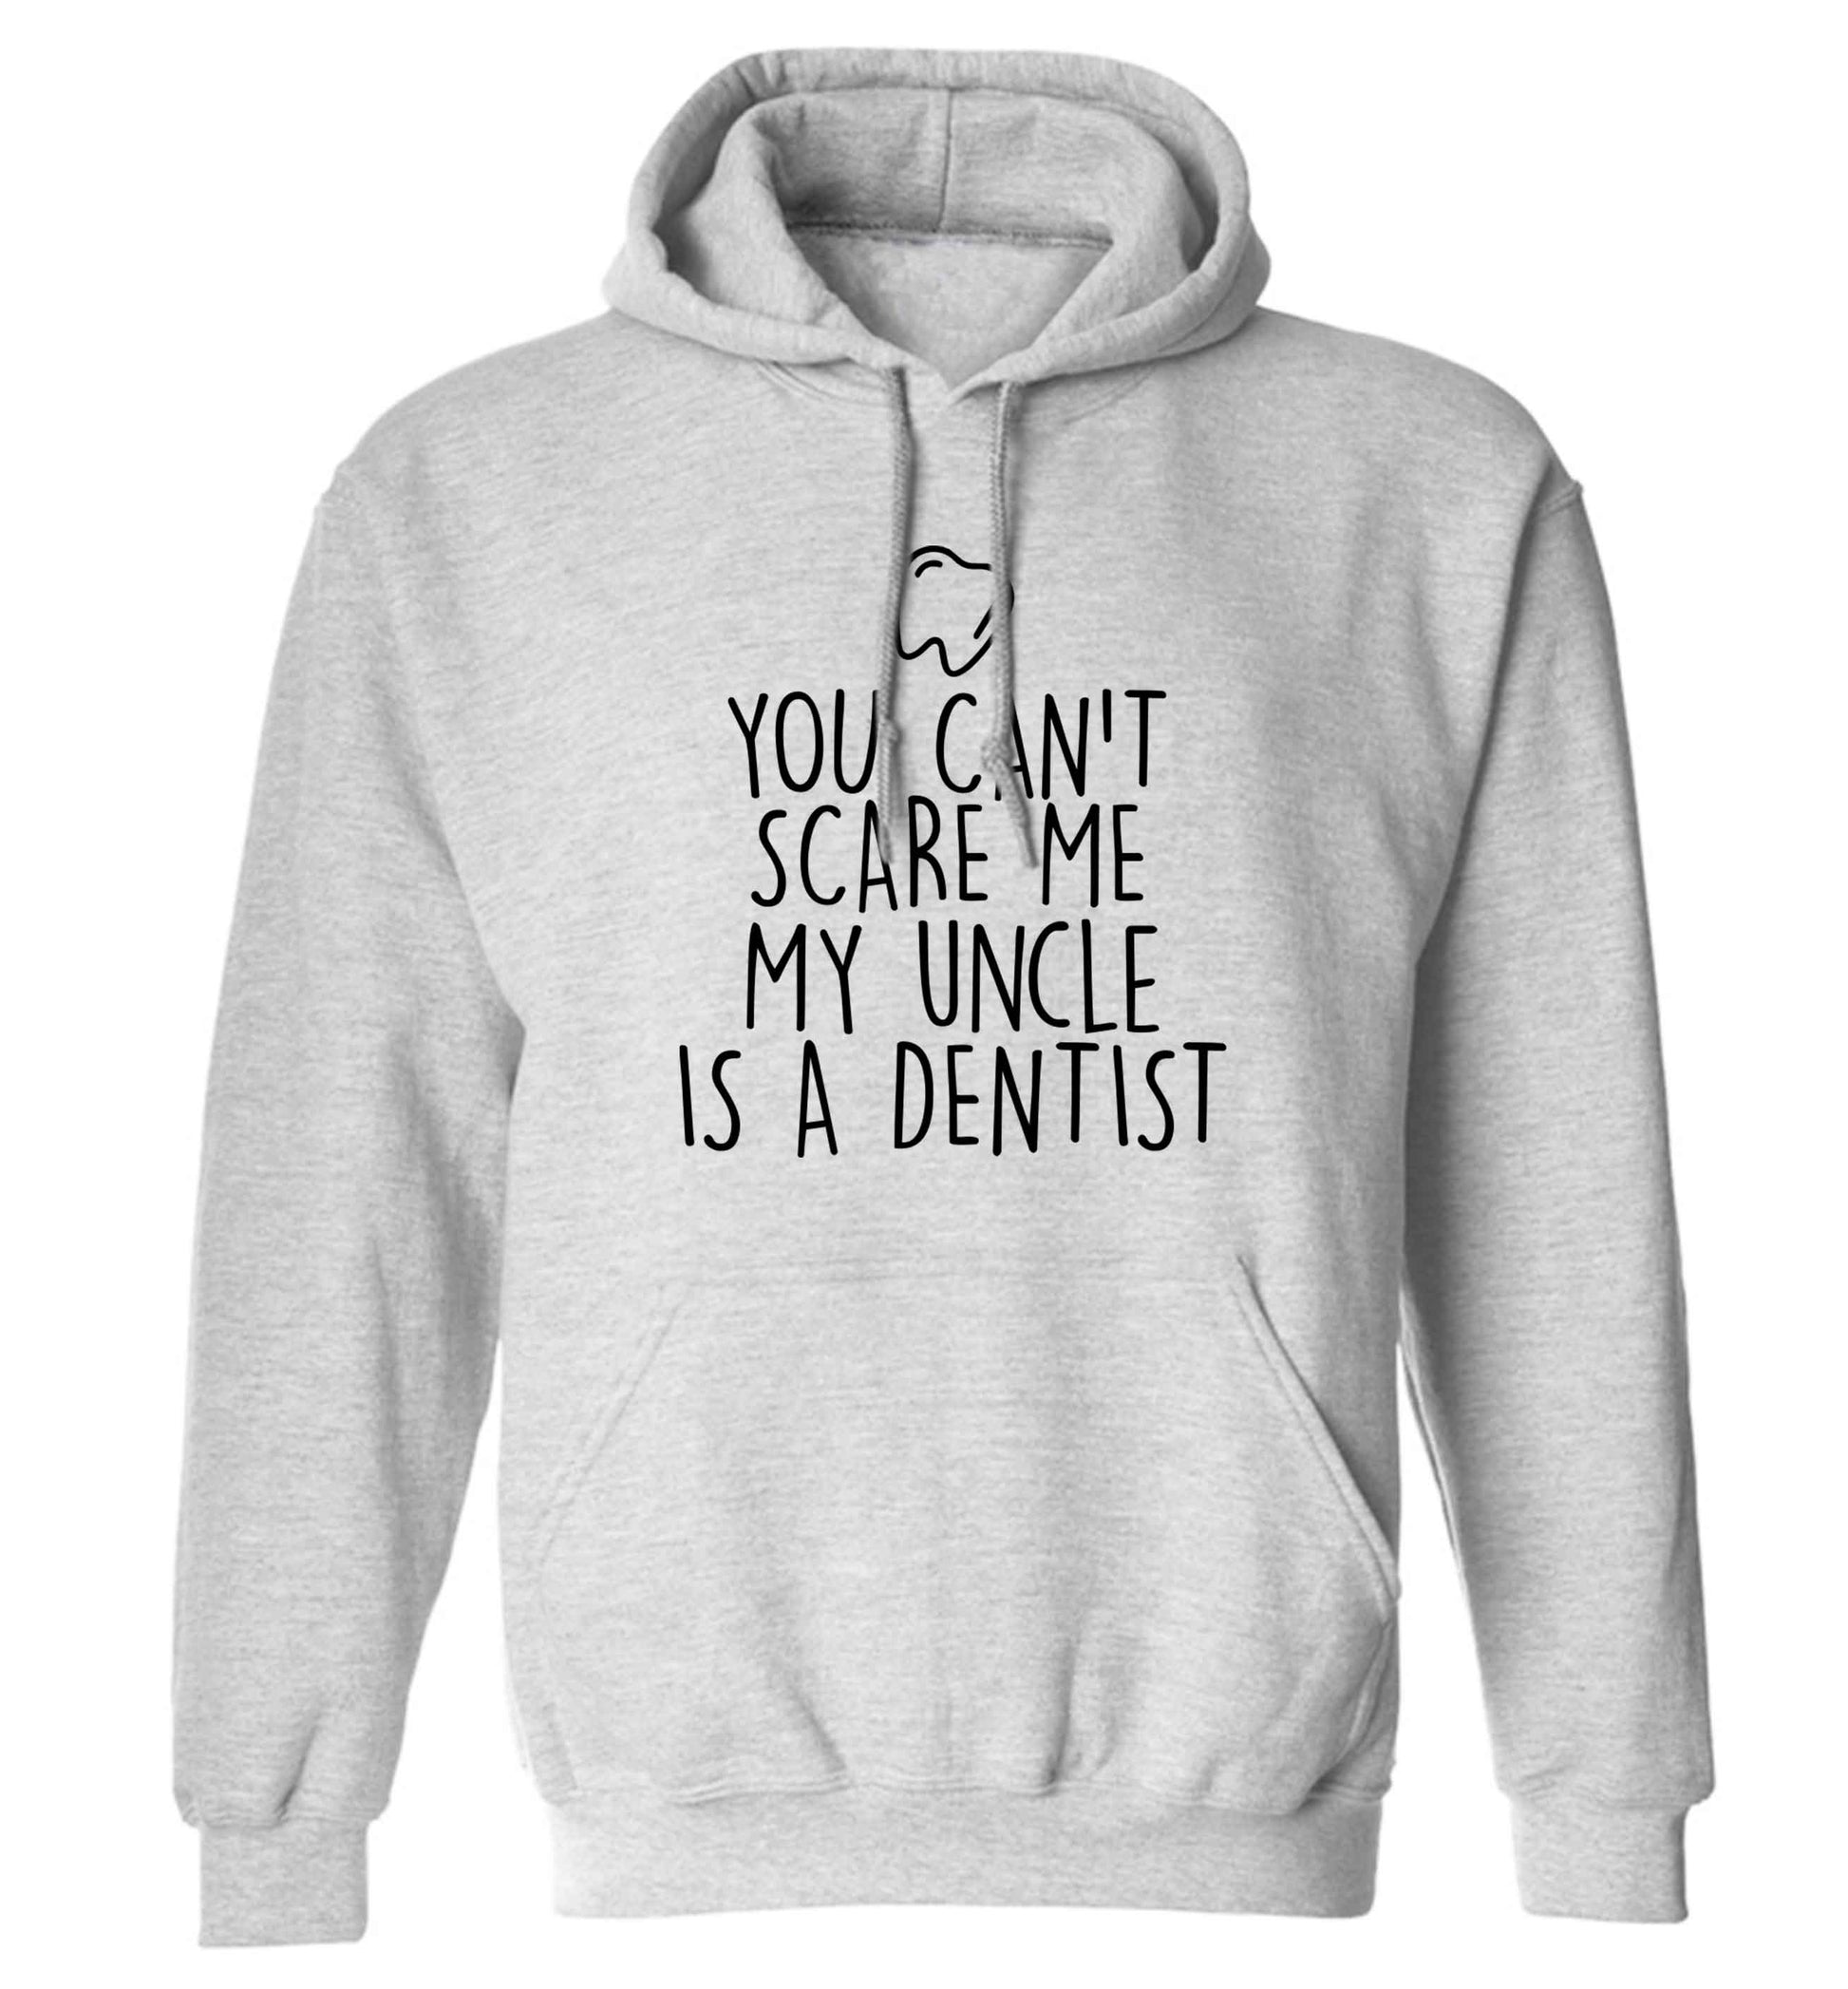 You can't scare me my uncle is a dentist adults unisex grey hoodie 2XL